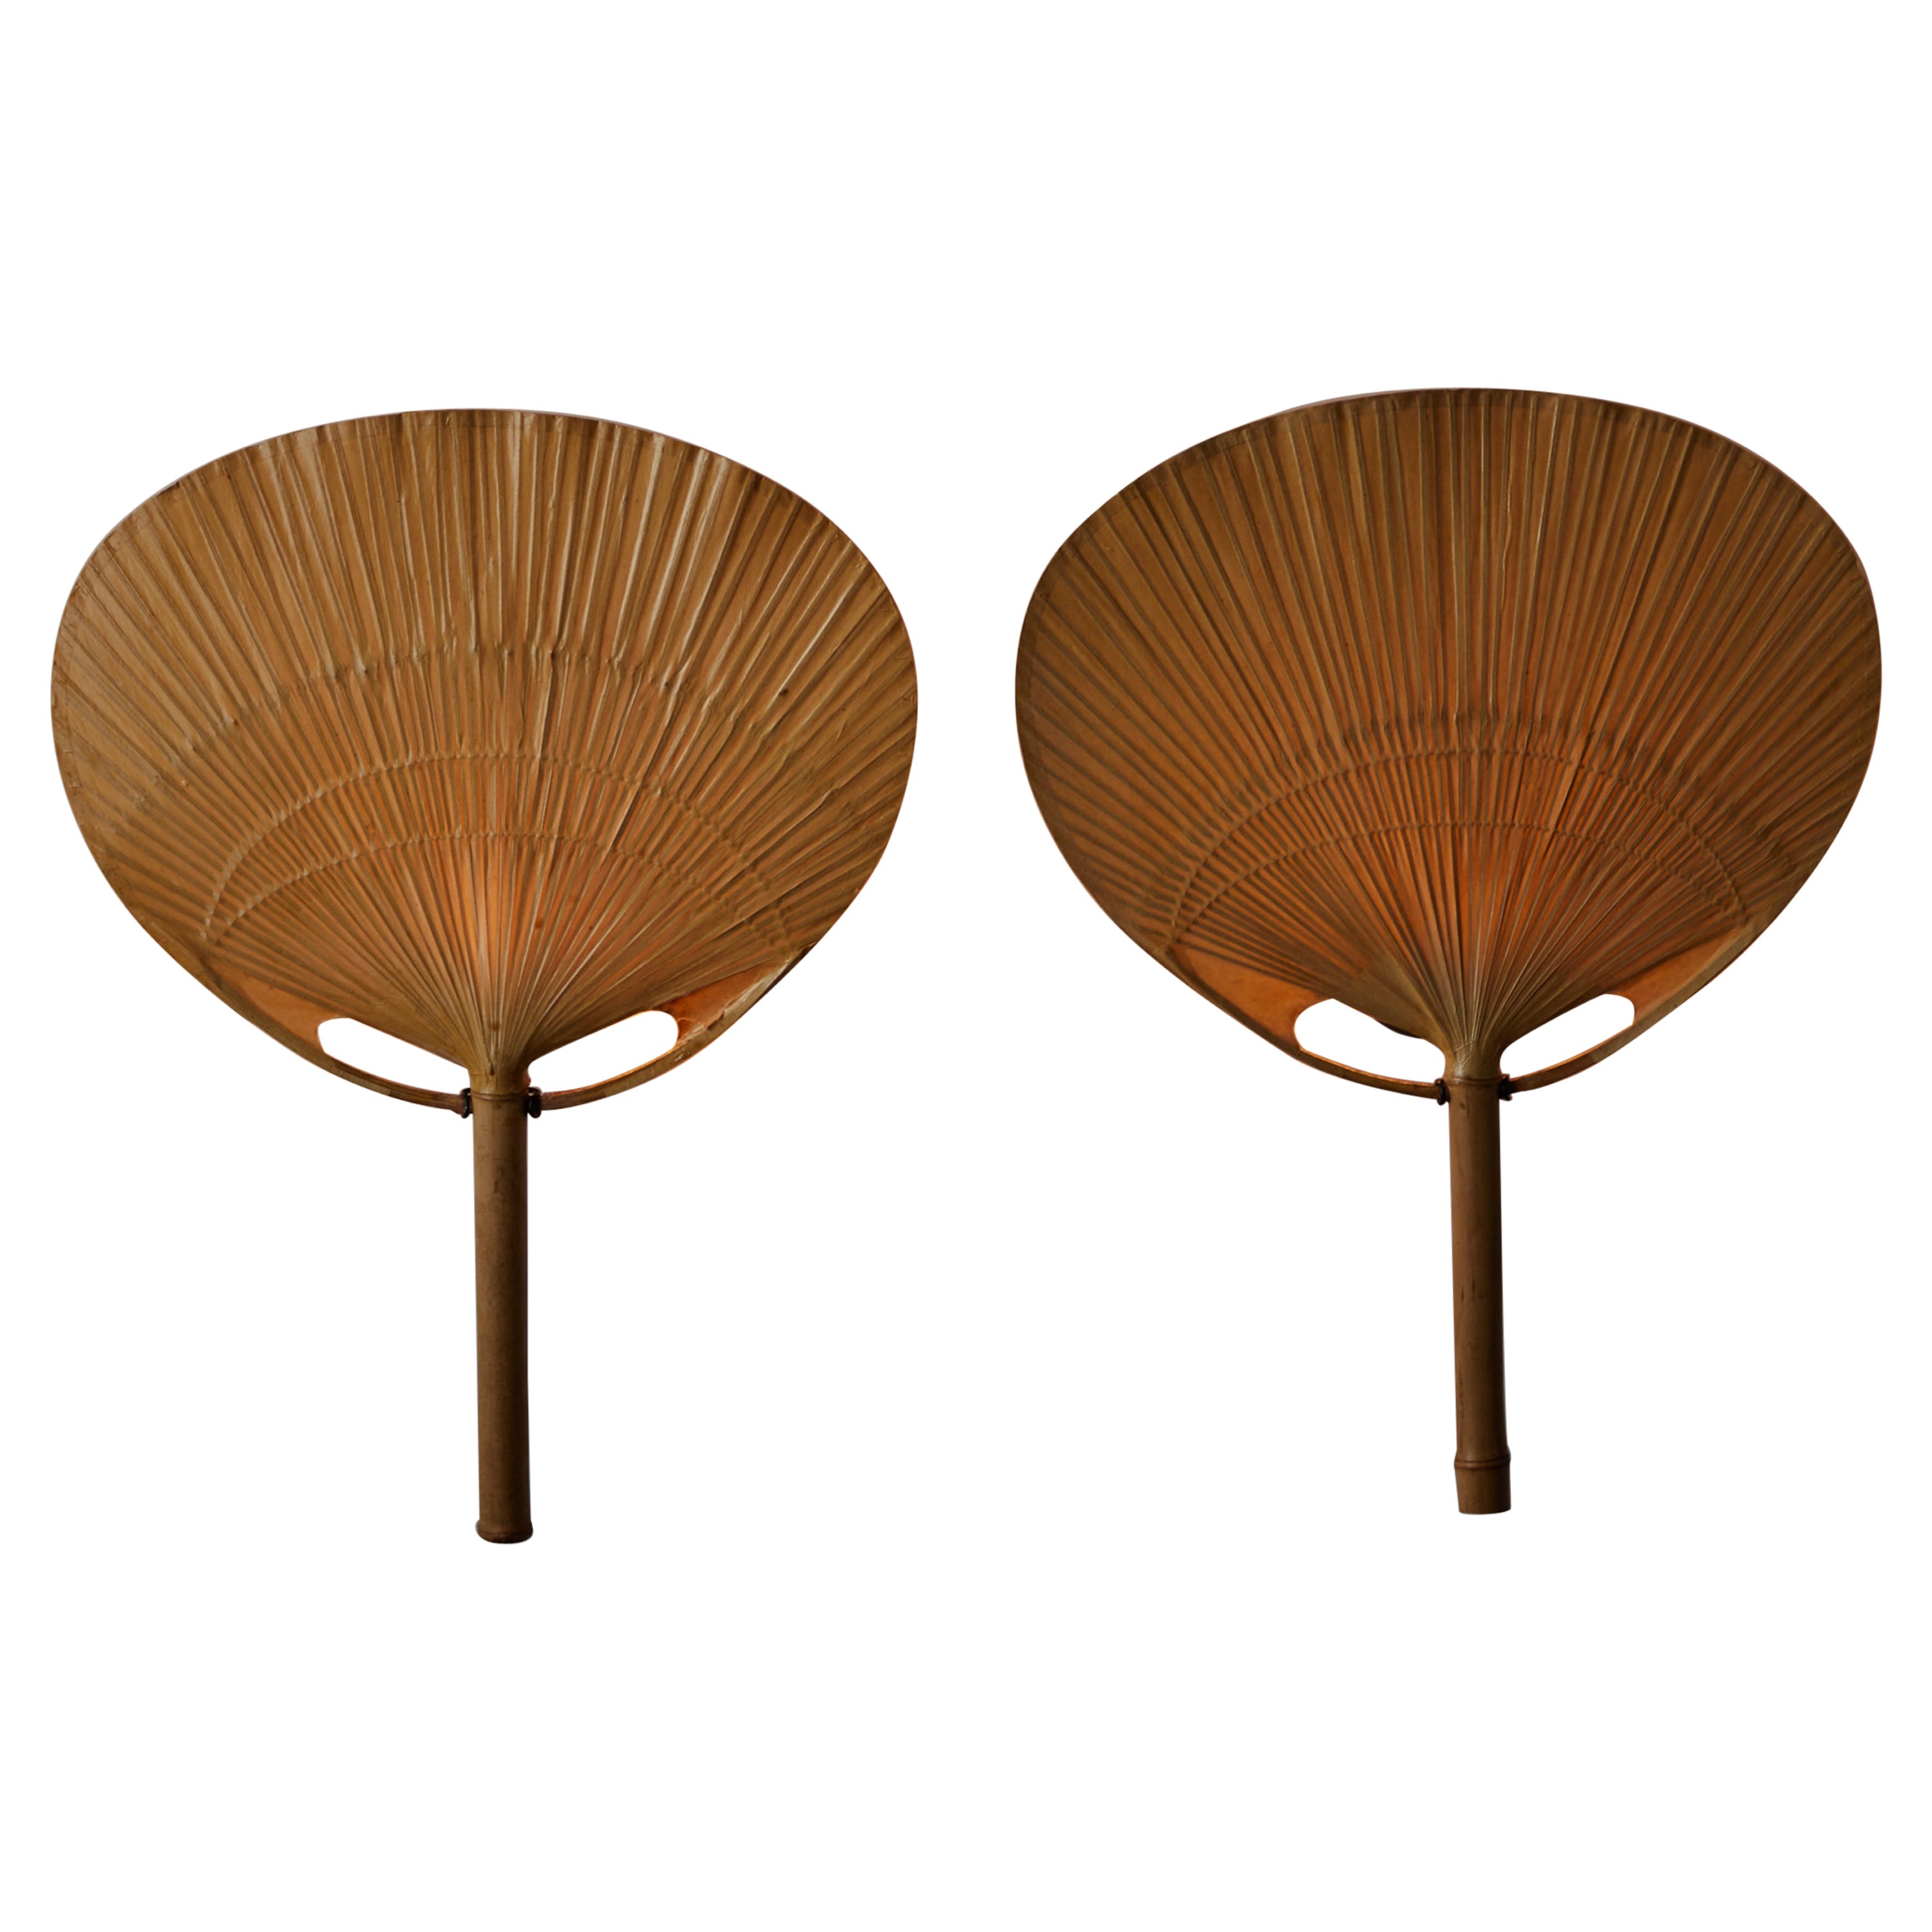 Pair of "Uchiwa" Wall Lights by Ingo Maurer for Design M